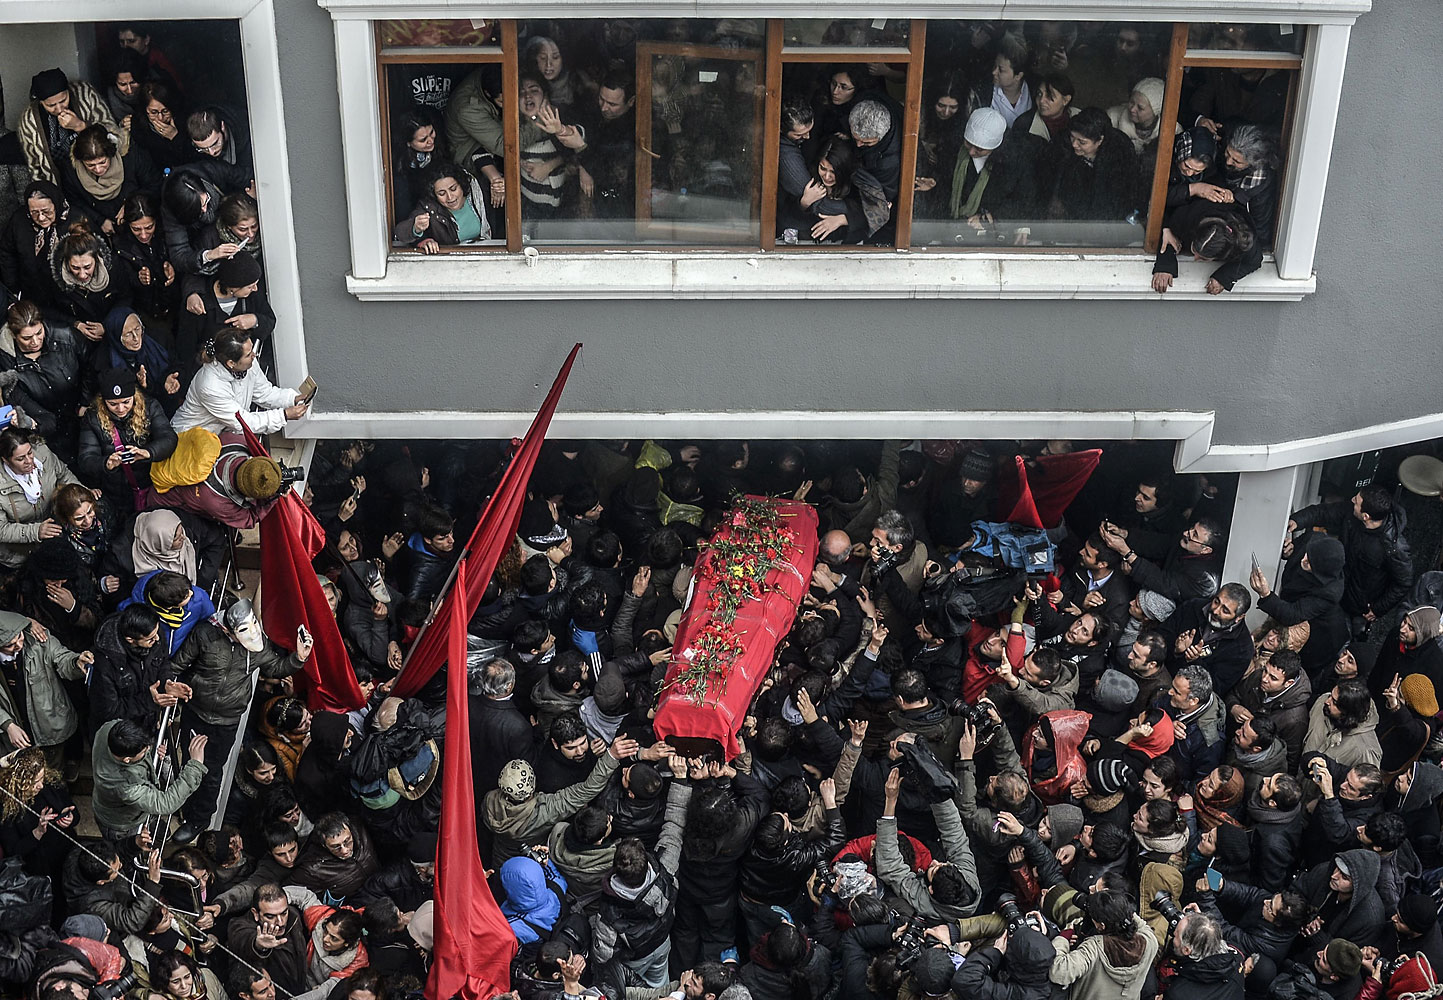 The coffin of Berkin Elvan is carried  on March 11, 2014, in Istanbul. Berkin Elvan, who has been in a coma since June 2013 after being struck in the head by a gas canister during a police crackdown on protesters, died earlier on the day.